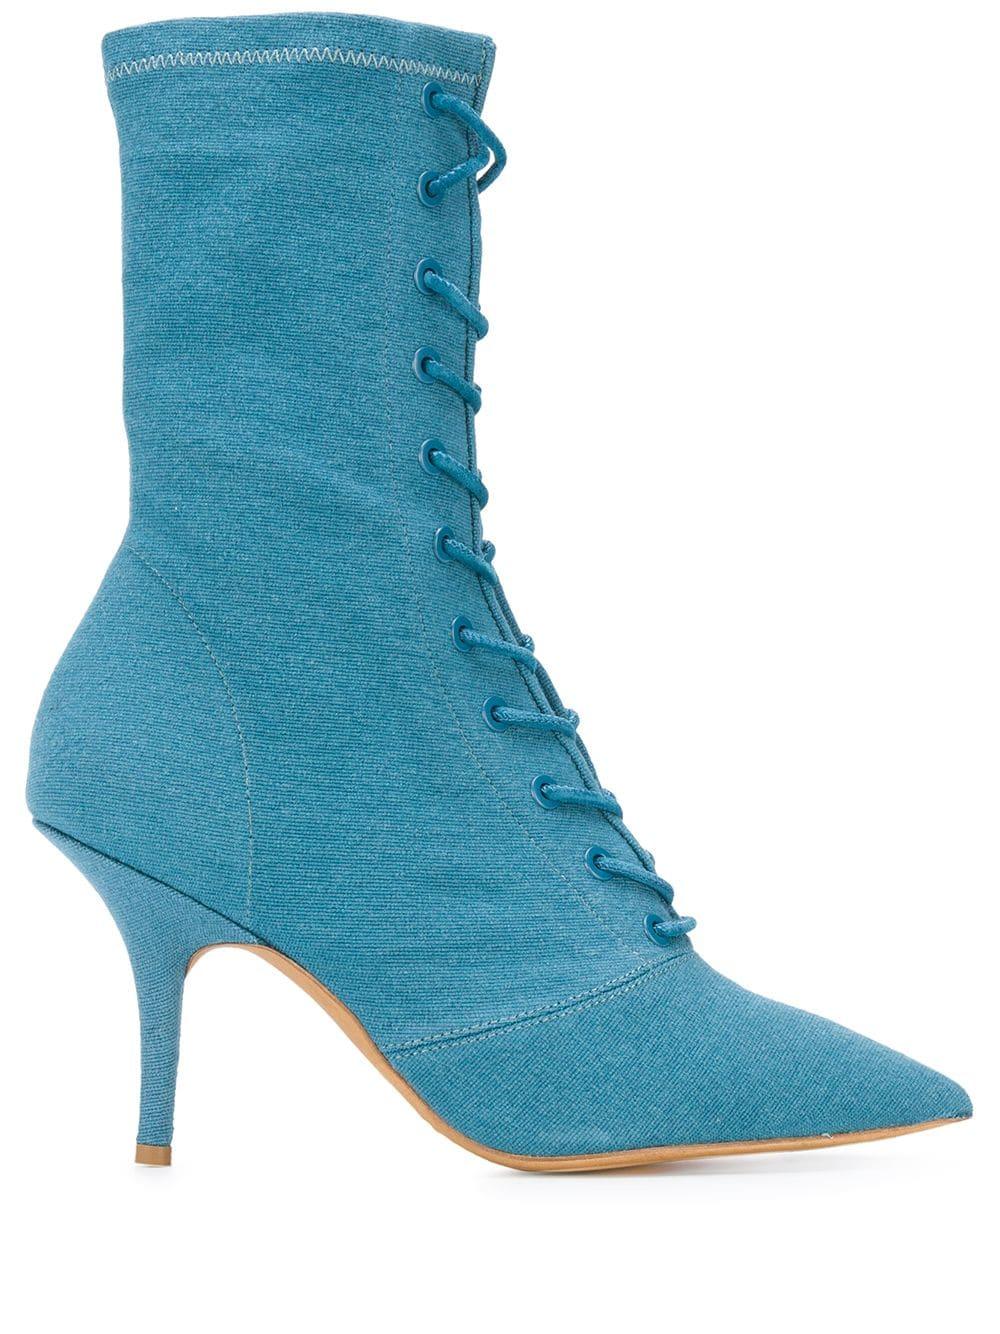 Yeezy Cotton 95 Lace-up Ankle Boots in Blue - Lyst